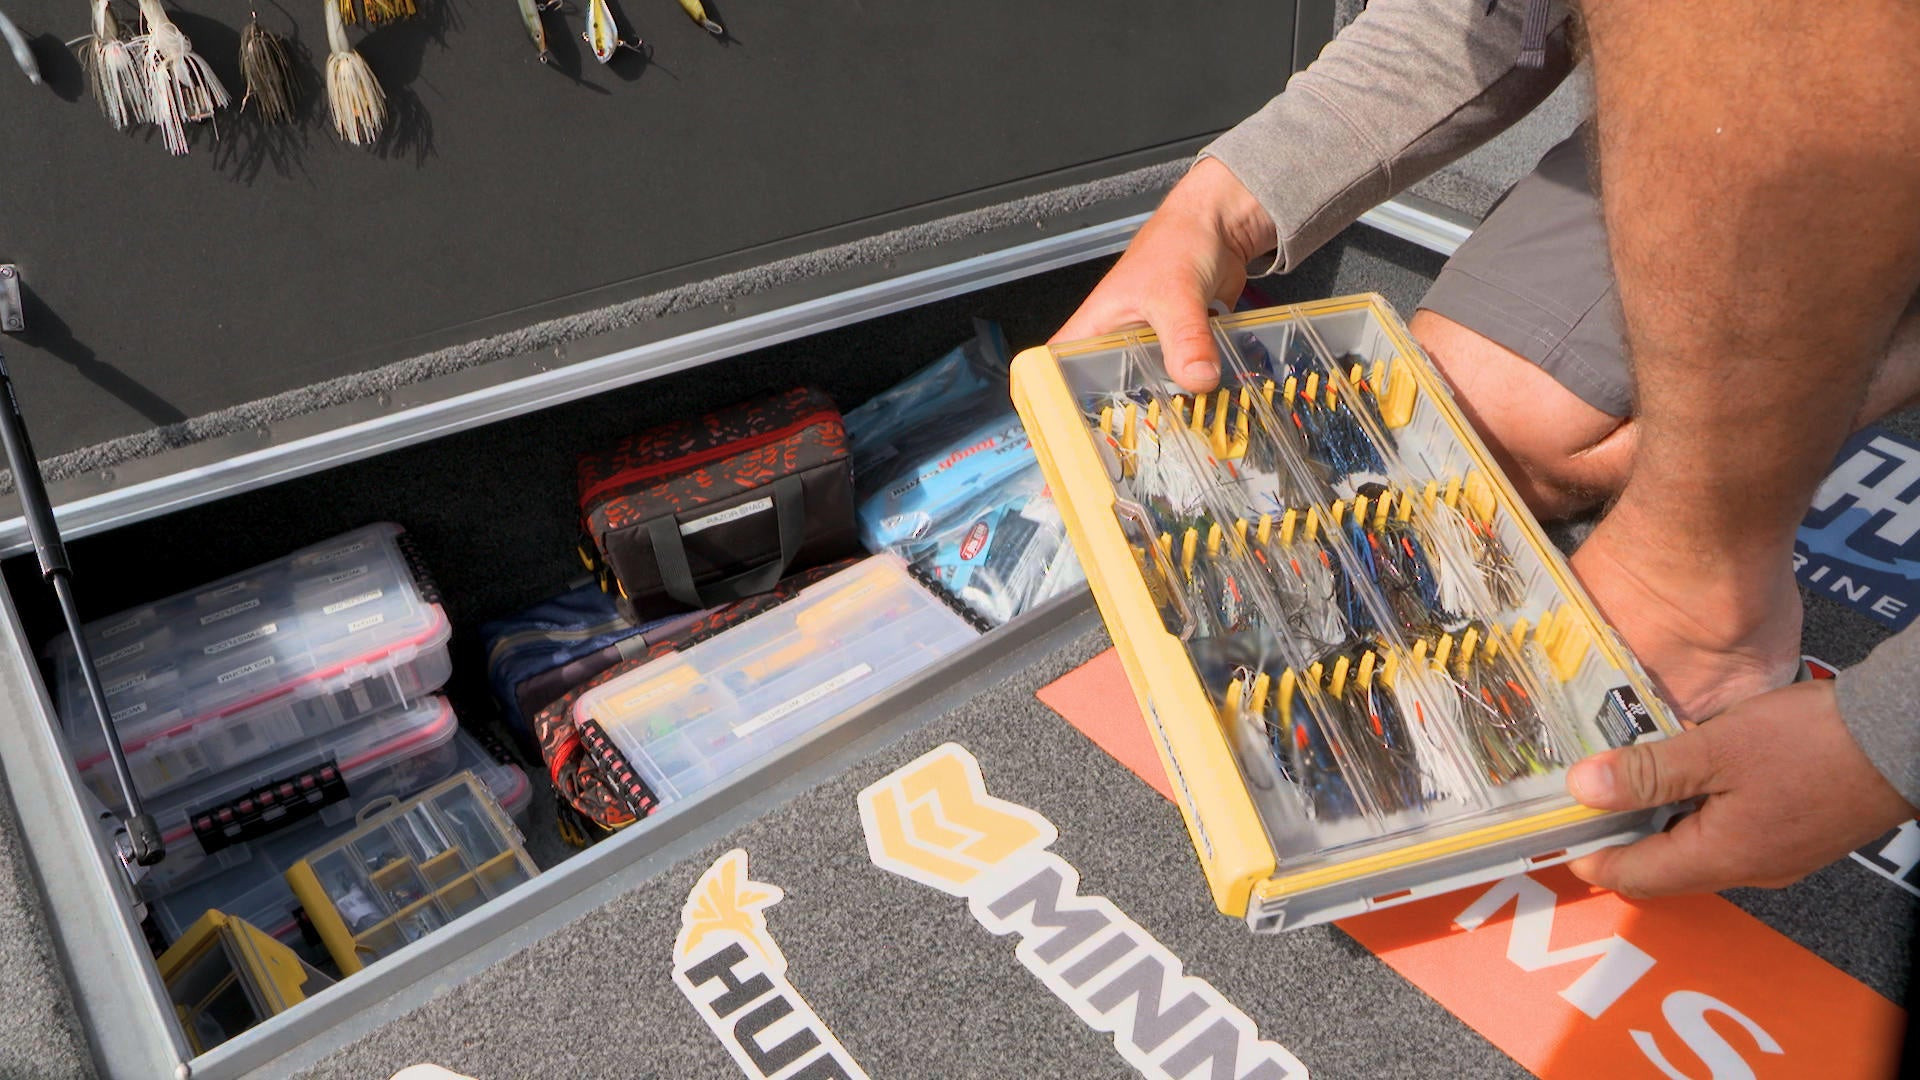 Bass Boat Tackle Storage Ideas that Make Fishing Easier - Wired2Fish